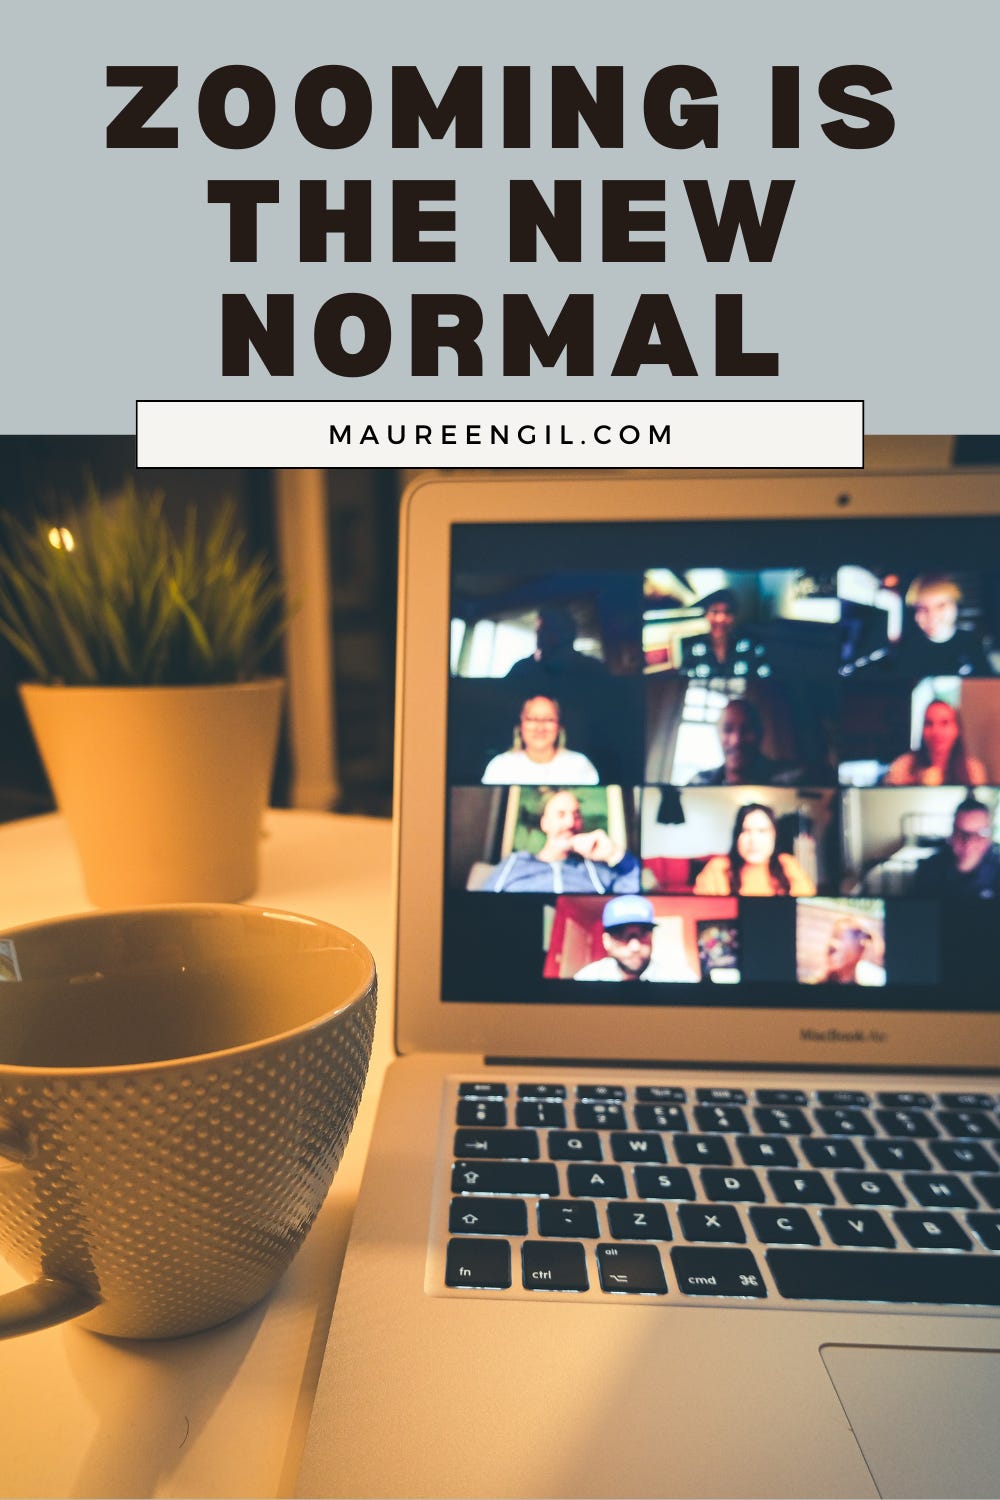 Zoom has quickly become a staple in our daily lives. From virtual meetings to online classes, this guide will help you make the most of this new normal.